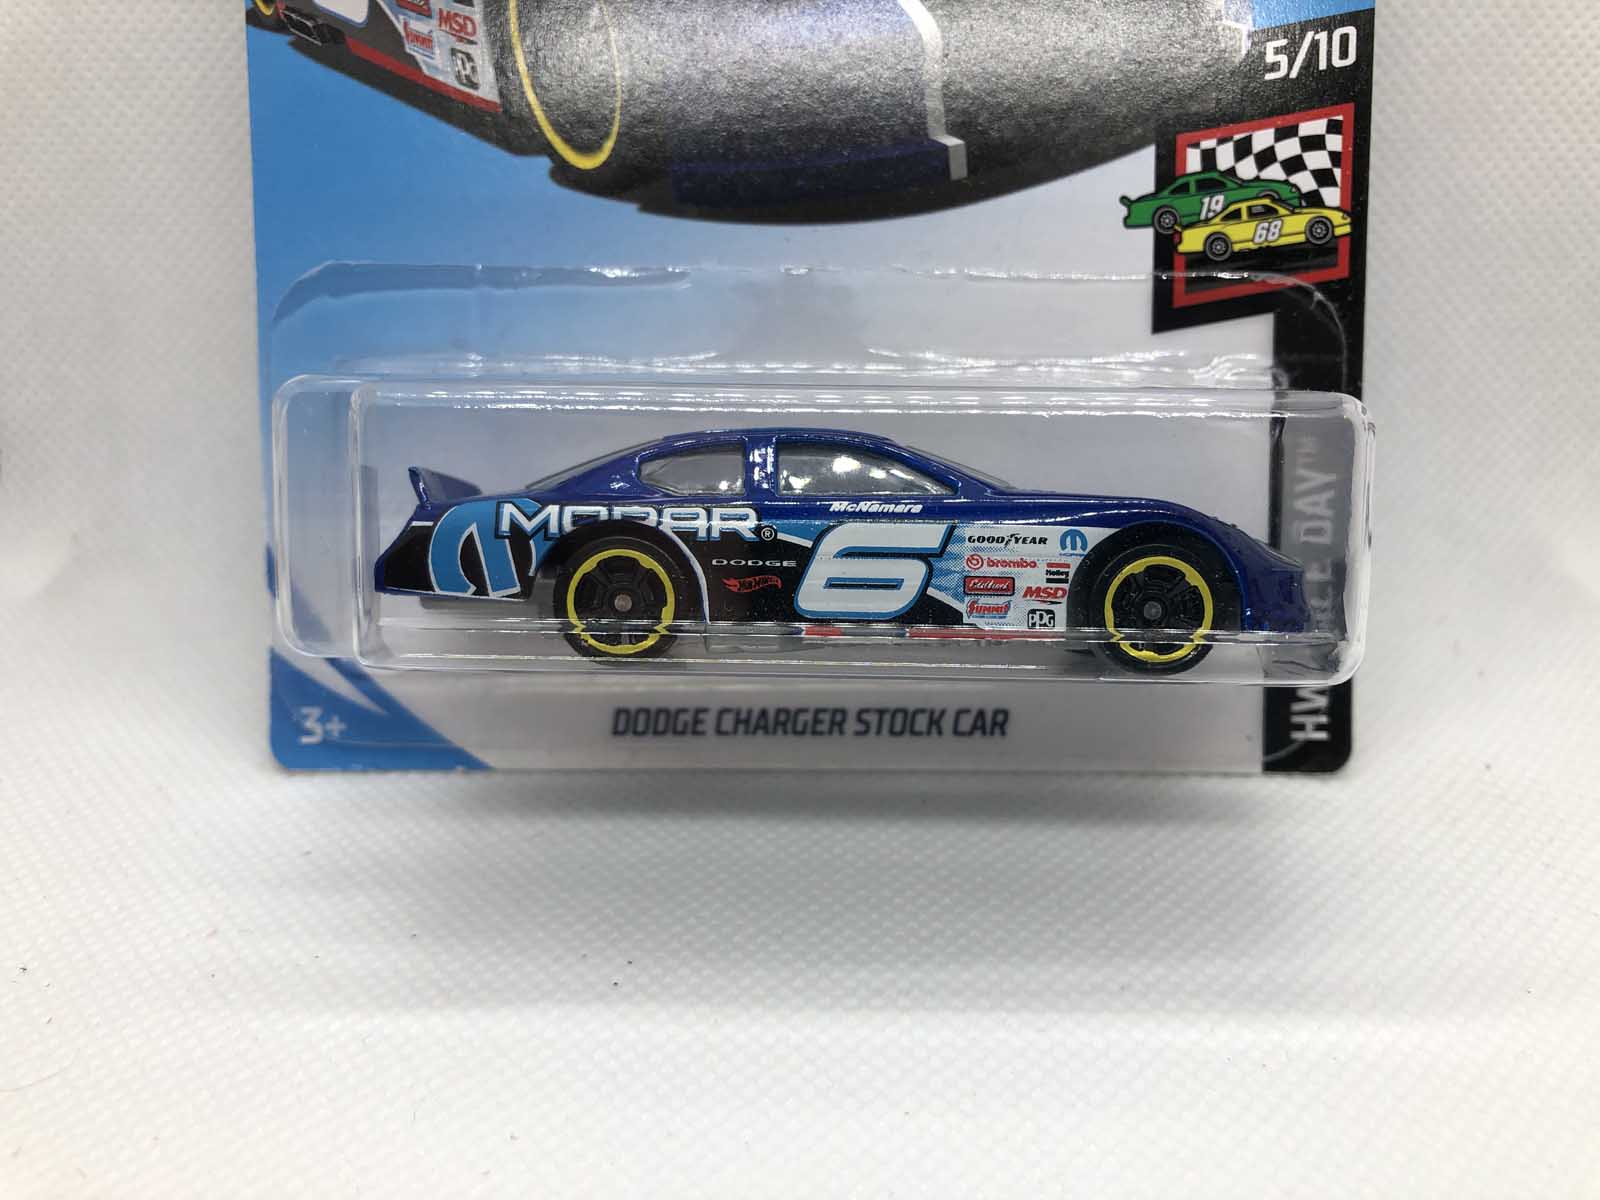 Dodge Charger Stock Car